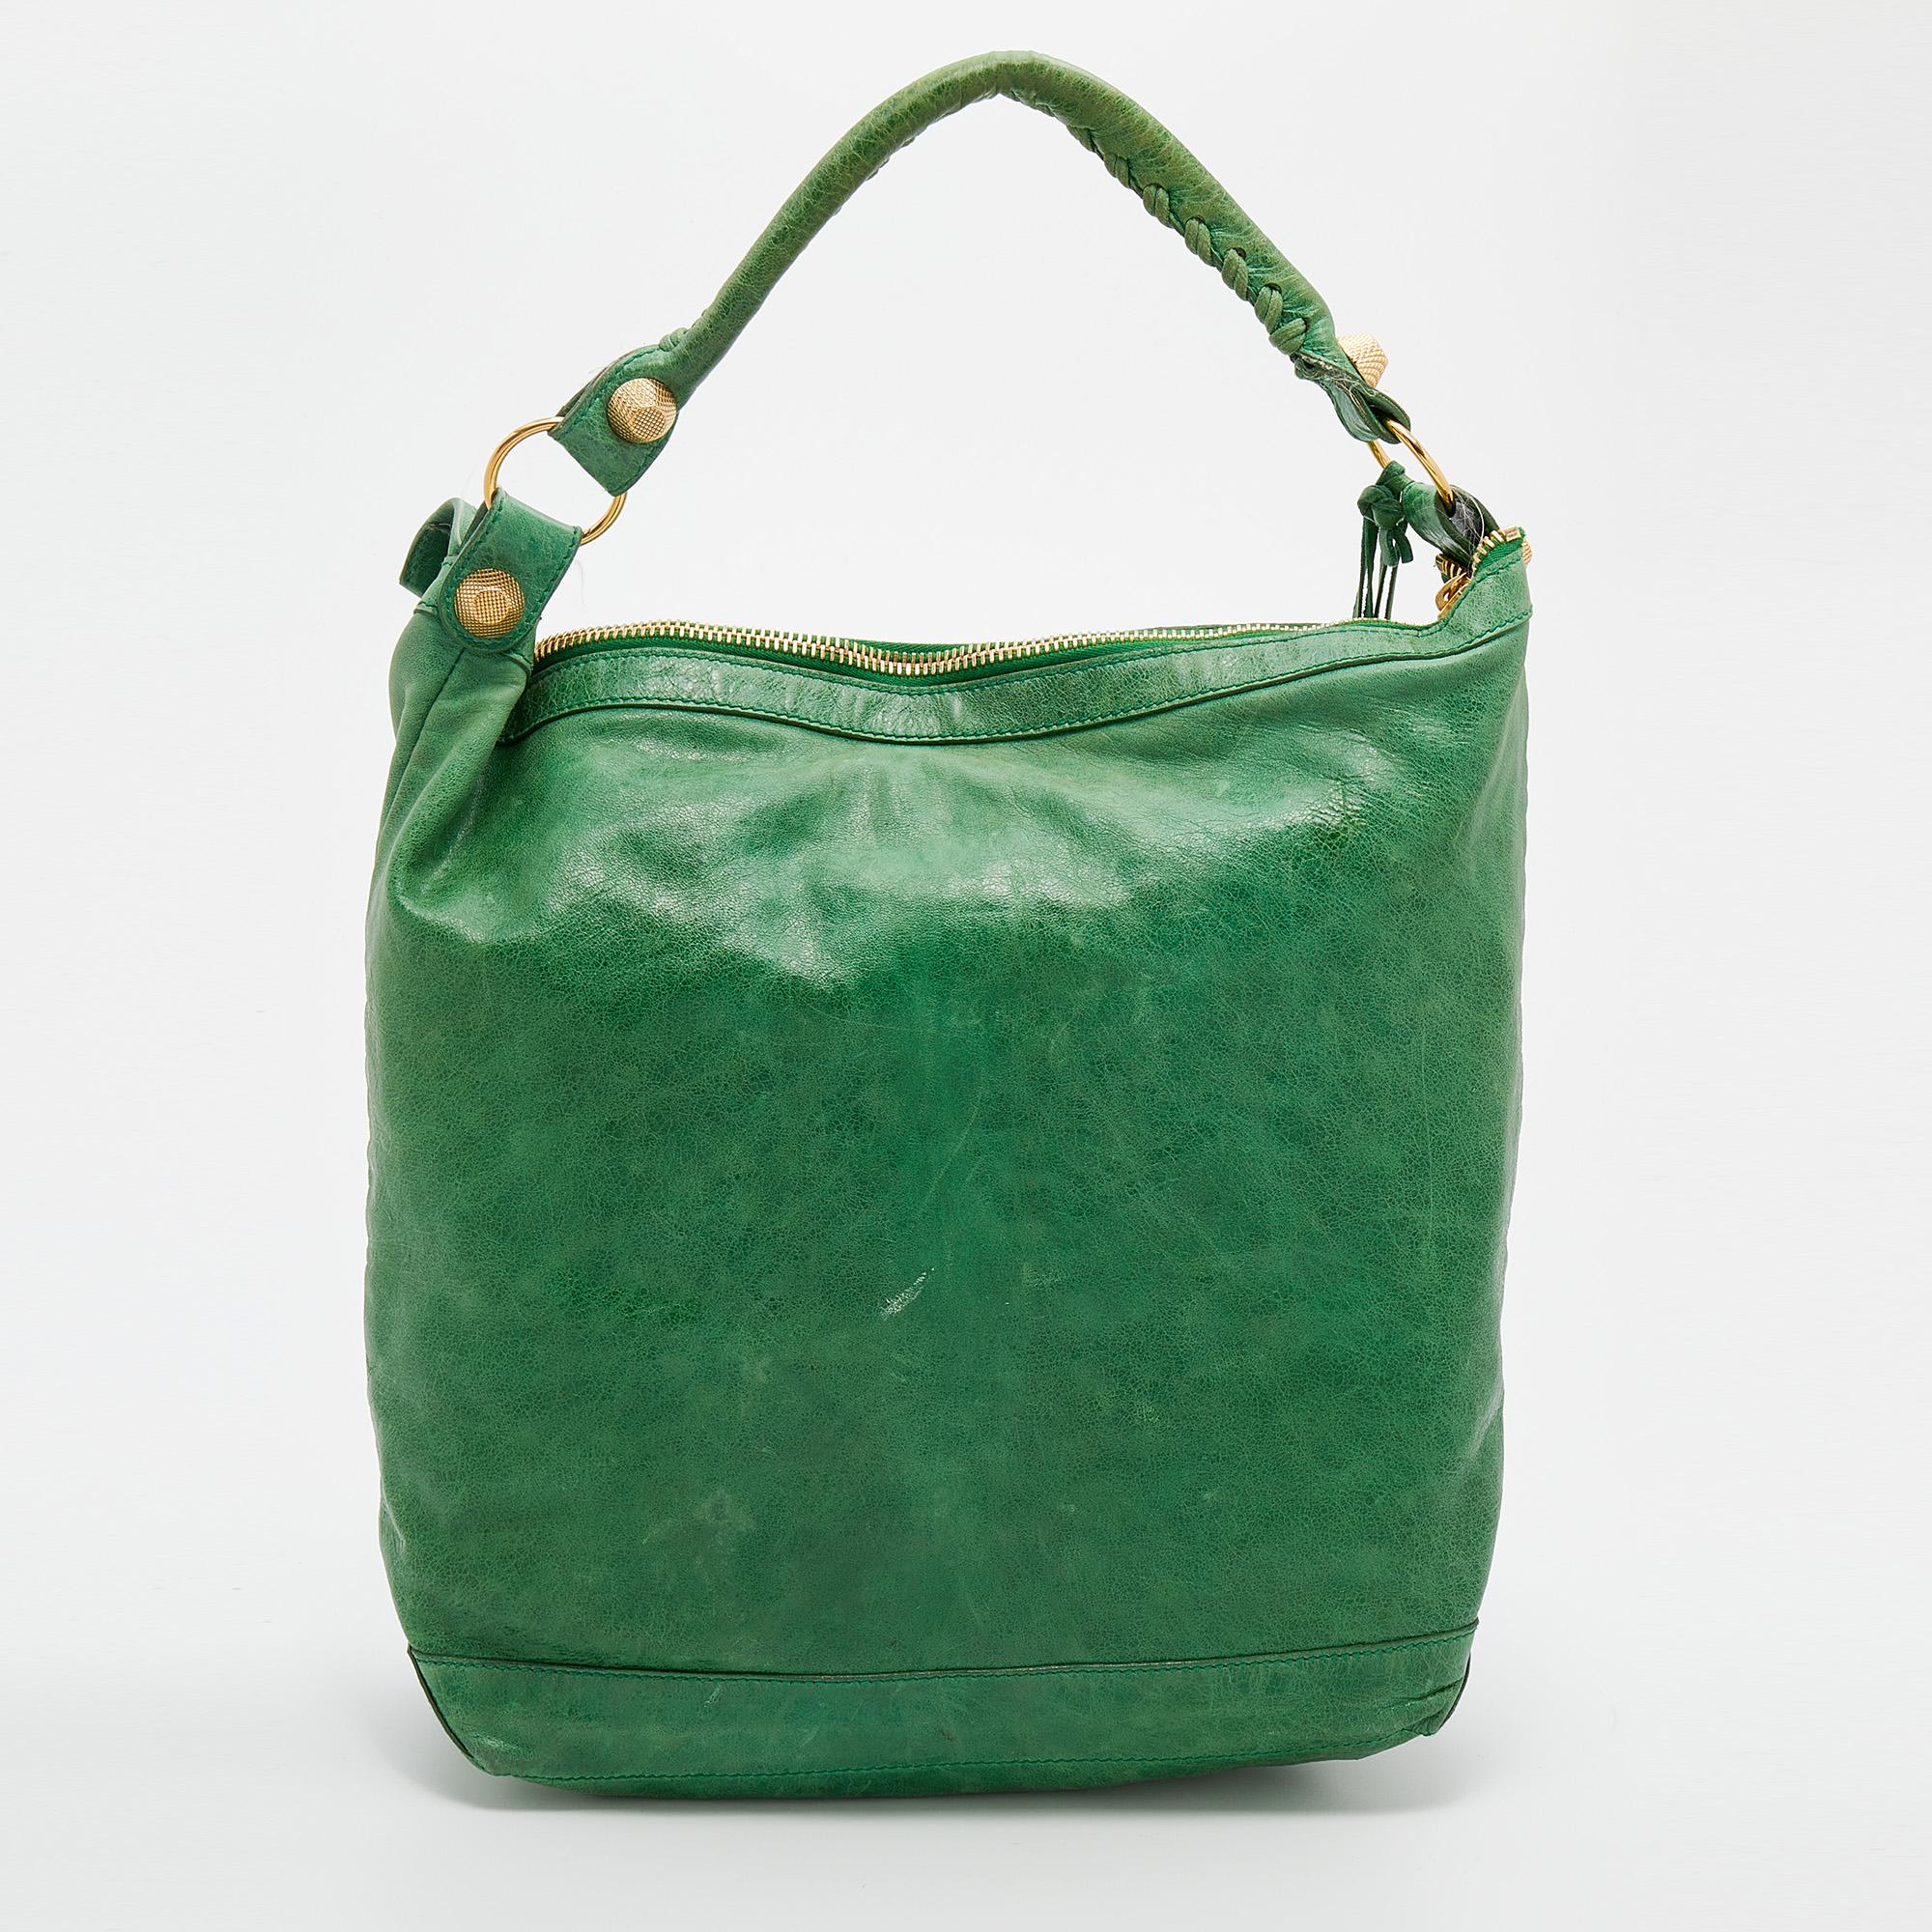 This Balenciaga Arena GGH Giant 21 Classic Day bag is perfect for everyday use. Crafted from leather in green, the bag has a classy silhouette with a top handle and signature accents in gold-tone hardware adorning the front. The zipper closure opens